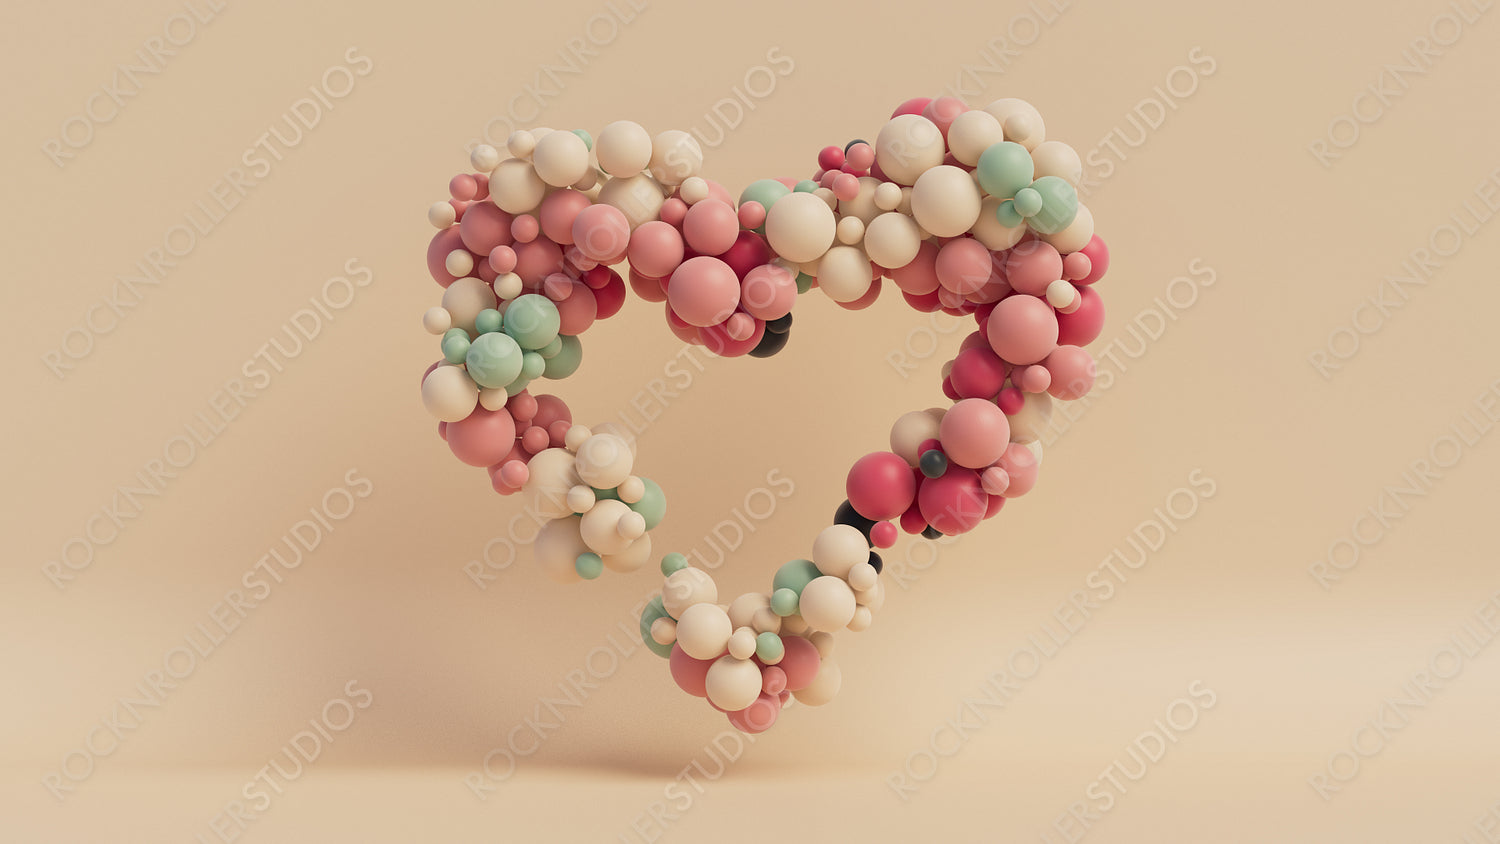 Multicolored Balloon Love Heart. Pink, White and Green Balloons arranged in a heart shape. 3D Render